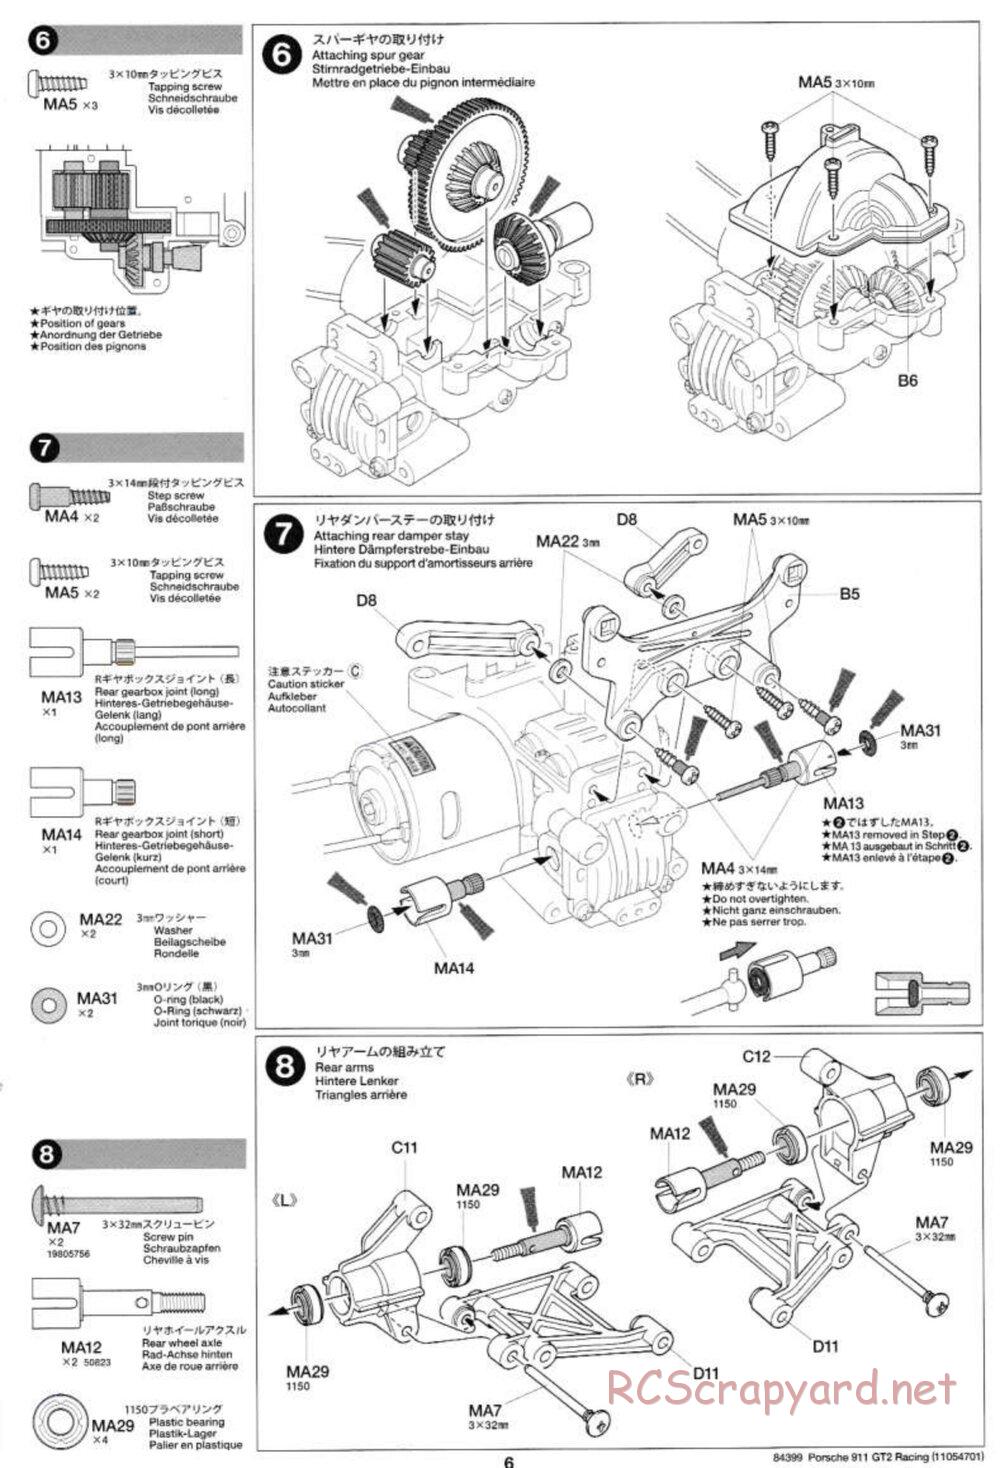 Tamiya - Porsche 911 GT2 Racing - TA-02SW Chassis - Manual - Page 6